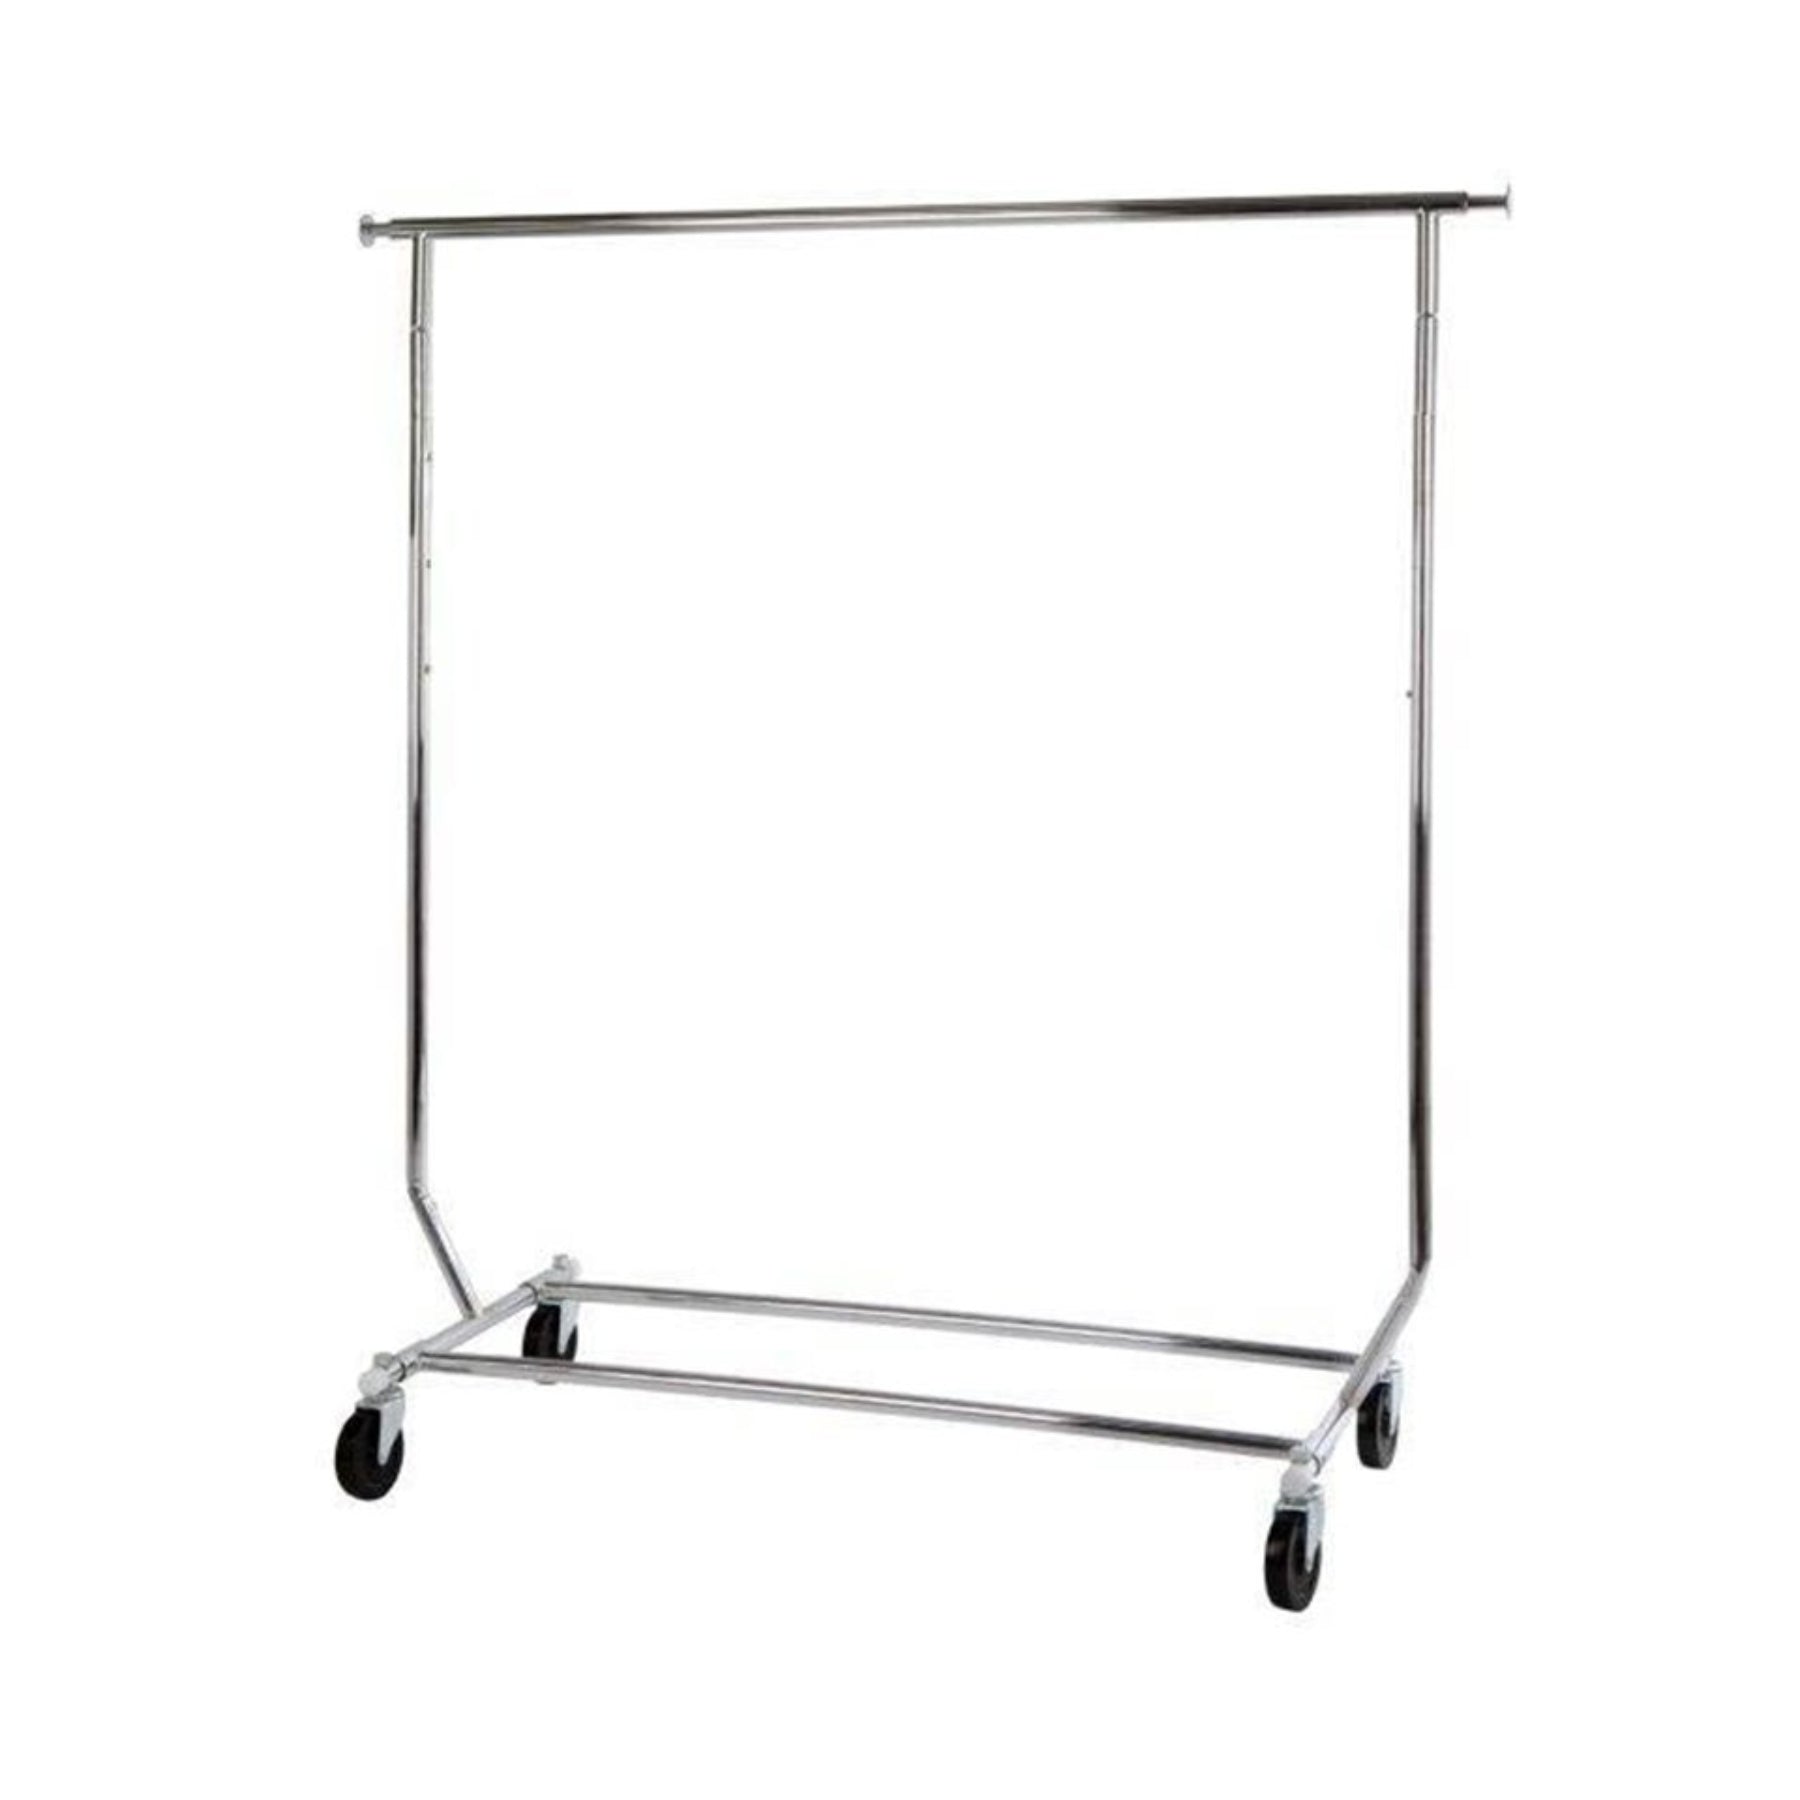 Foldable clothing rack for hire